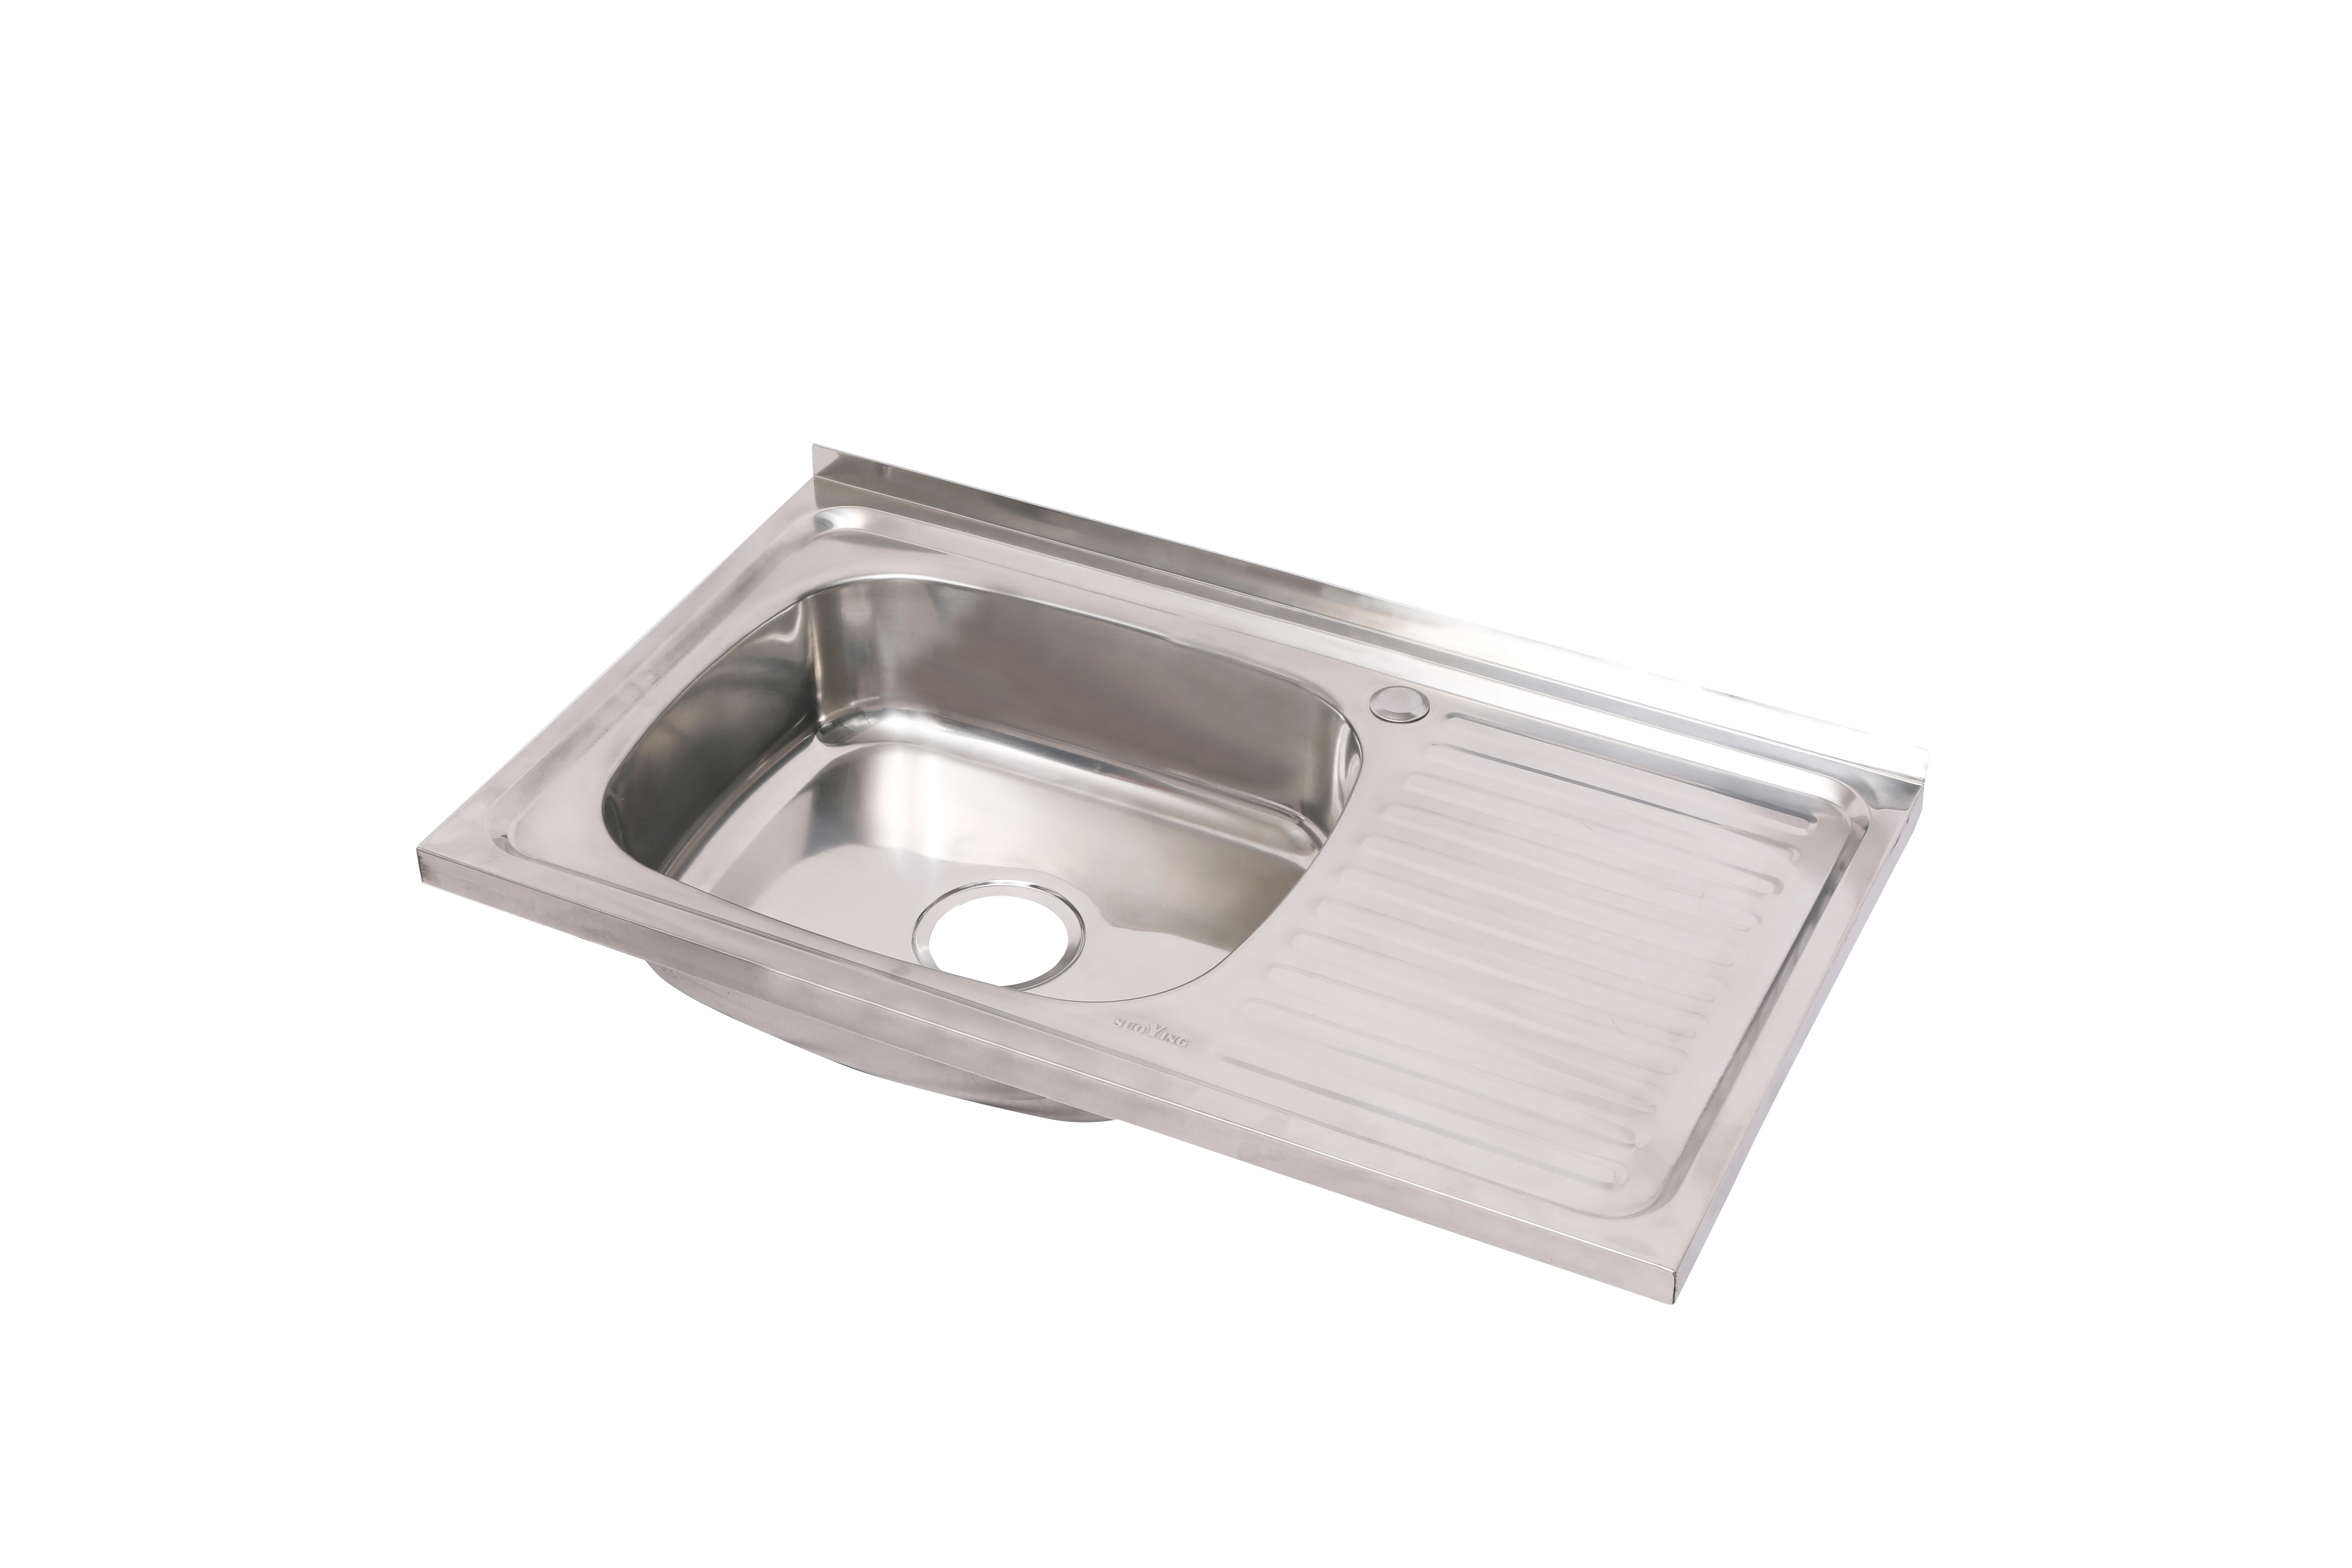 Unique Drainboard Stainless Steel Sink 304 Basin Deep Laundry Kitchen Sink For Cabinet